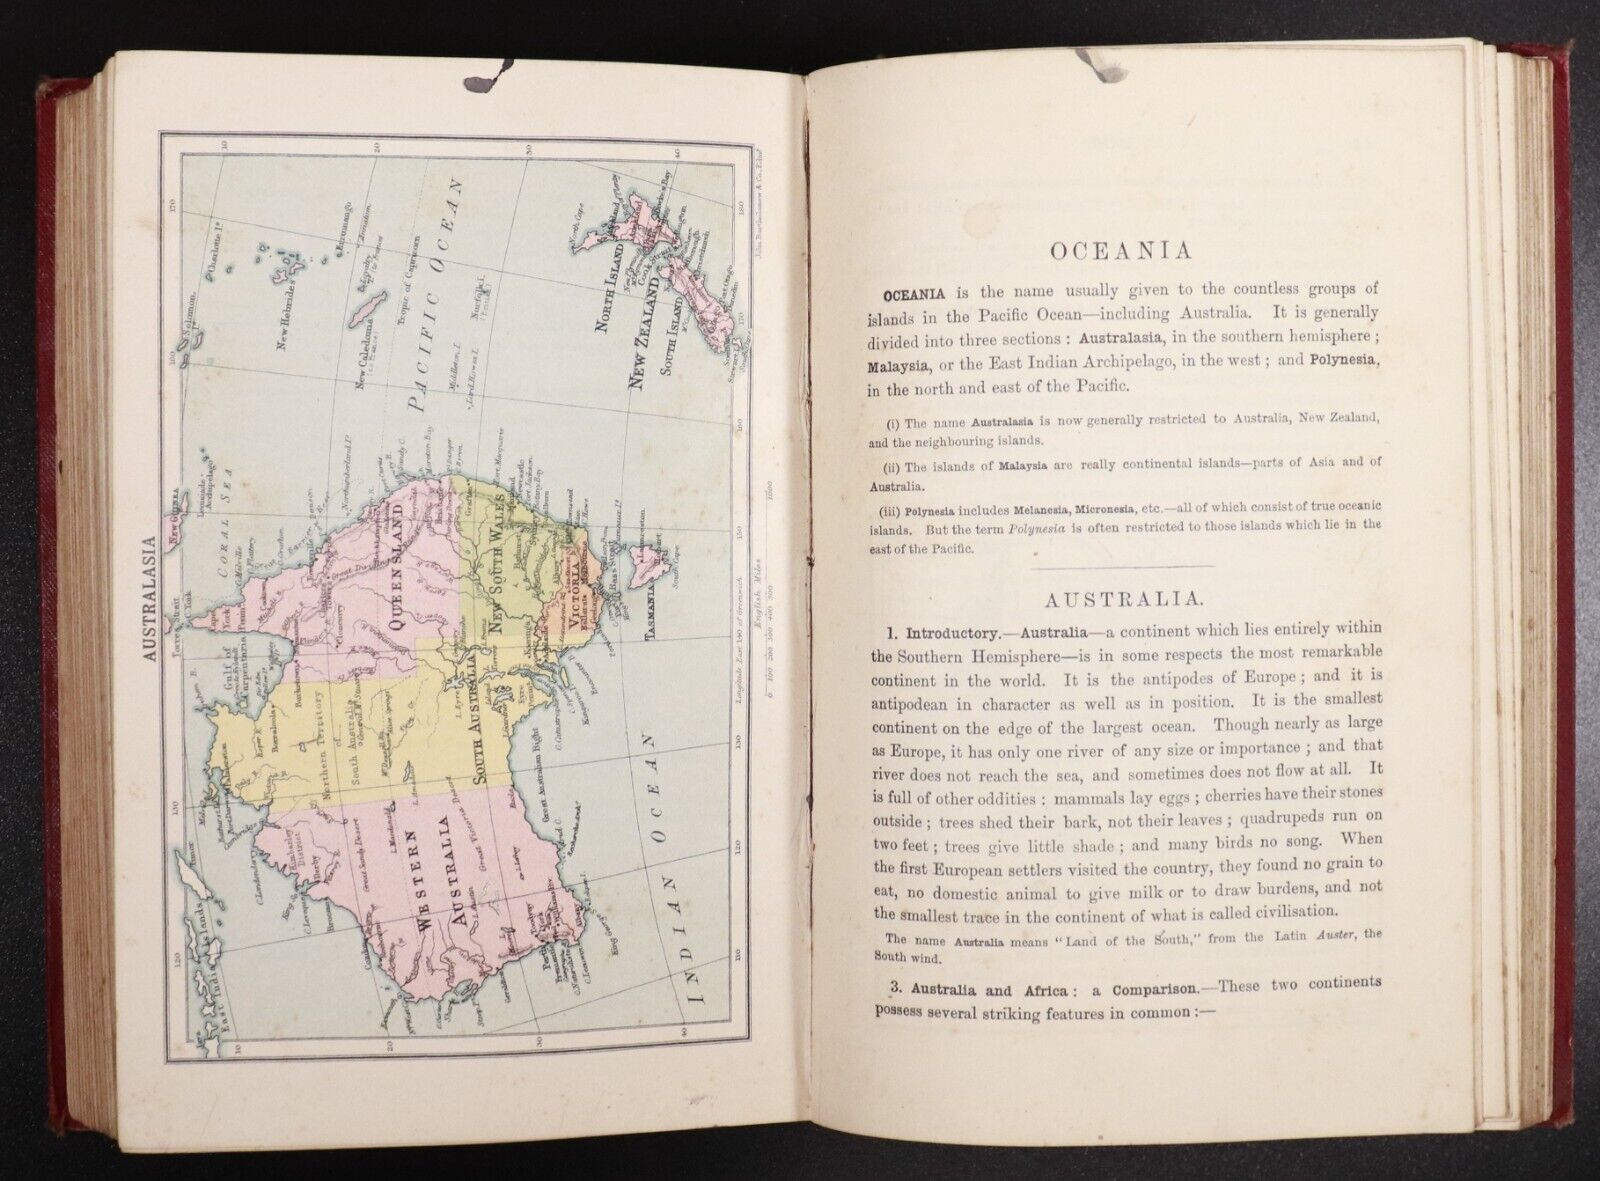 1909 A New Geography by JMD Meiklejohn Antique World Reference Maps Book